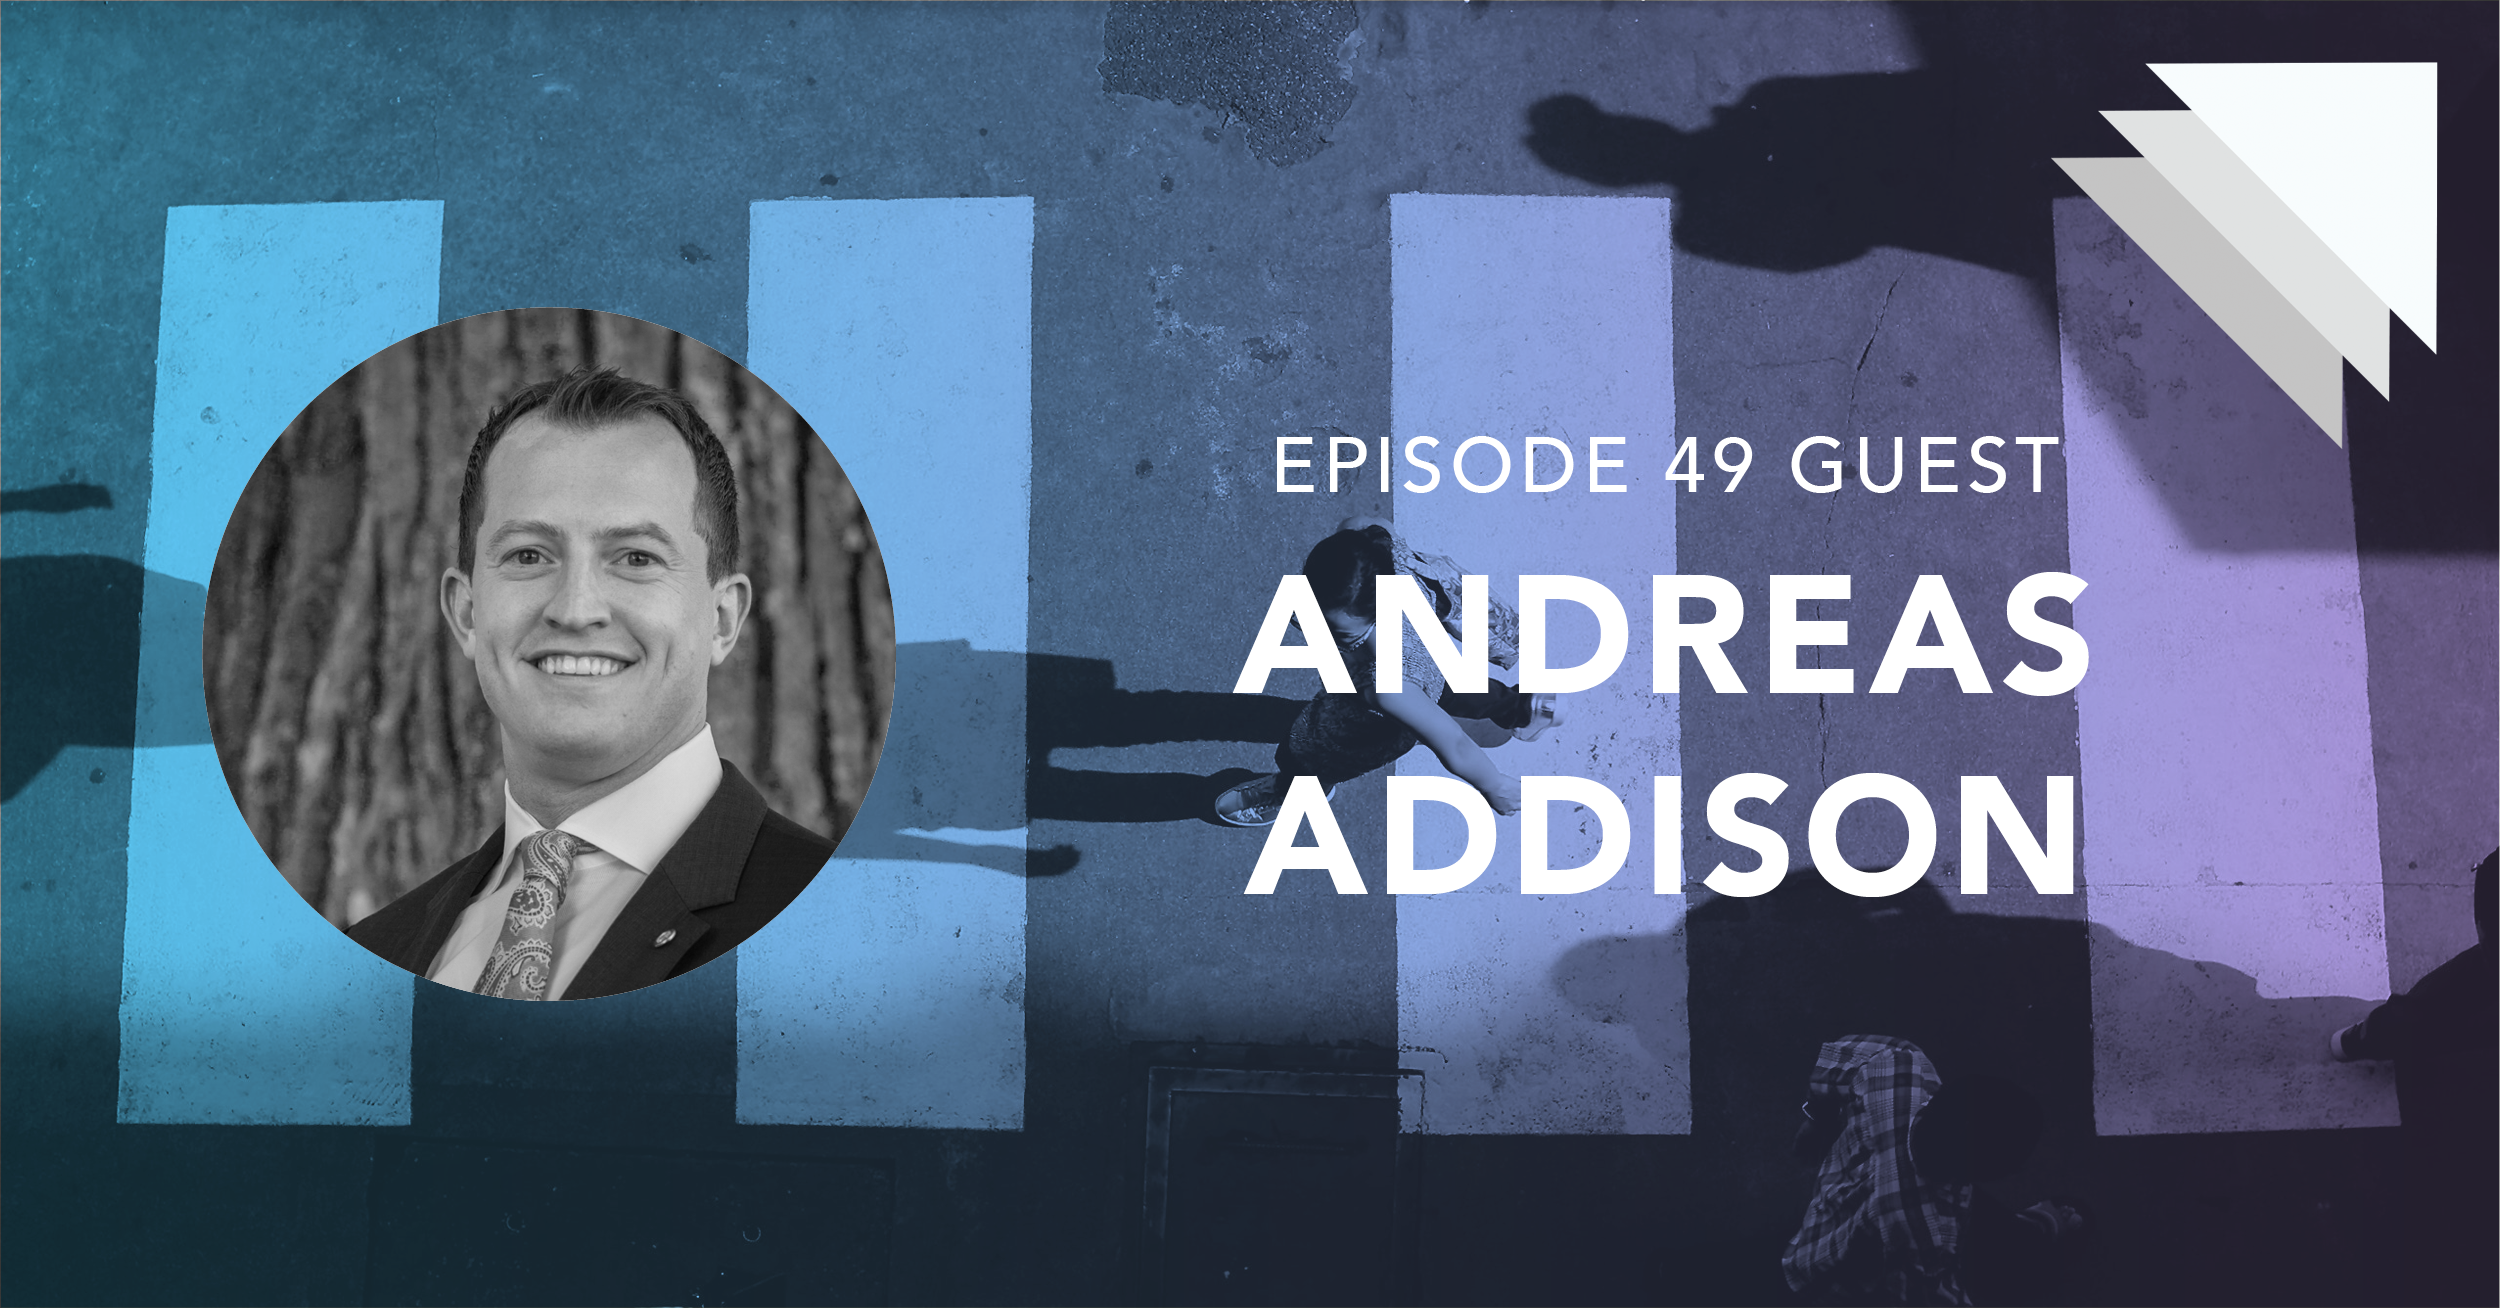 Episode 49 Guest Andreas Addison